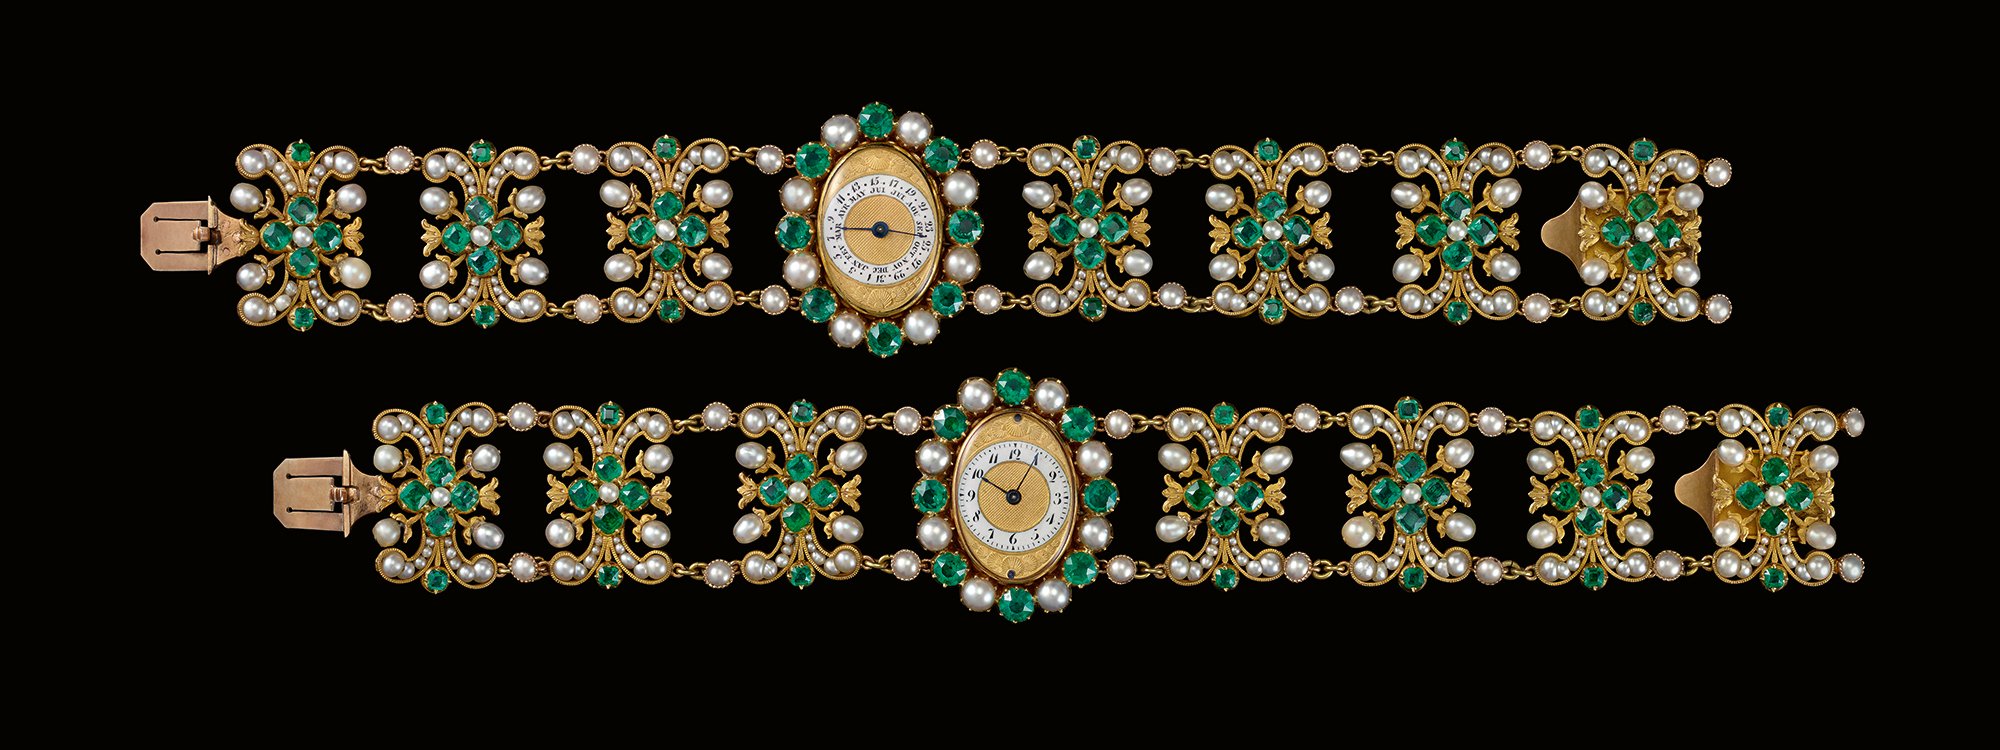 Princess Auguste Amelie of Bavaria wristwatch, attr. Marie-Etienne Nitot and son c.1811. The first known pair of watch bracelets in Chaumet's history. Photo: Nils Herrmann | © Chaumet Collection 